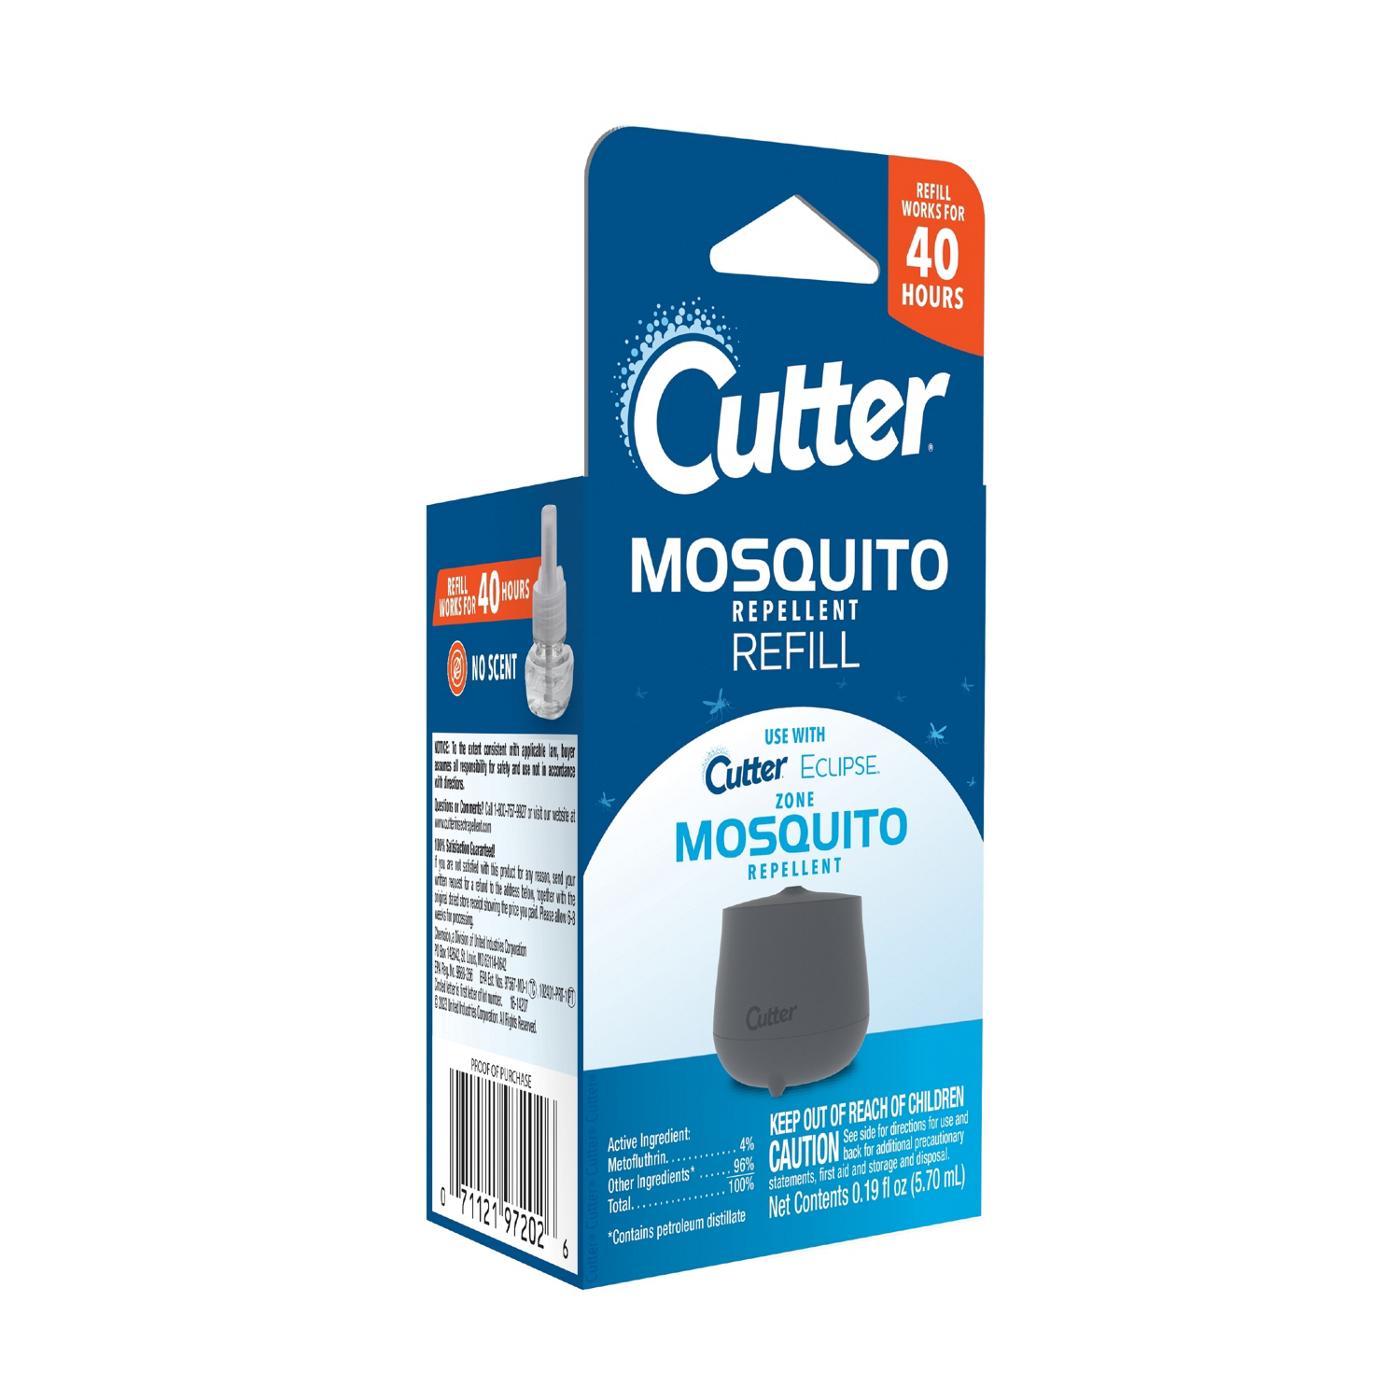 Cutter Eclipse Zone Mosquito Repellent Refill; image 2 of 2